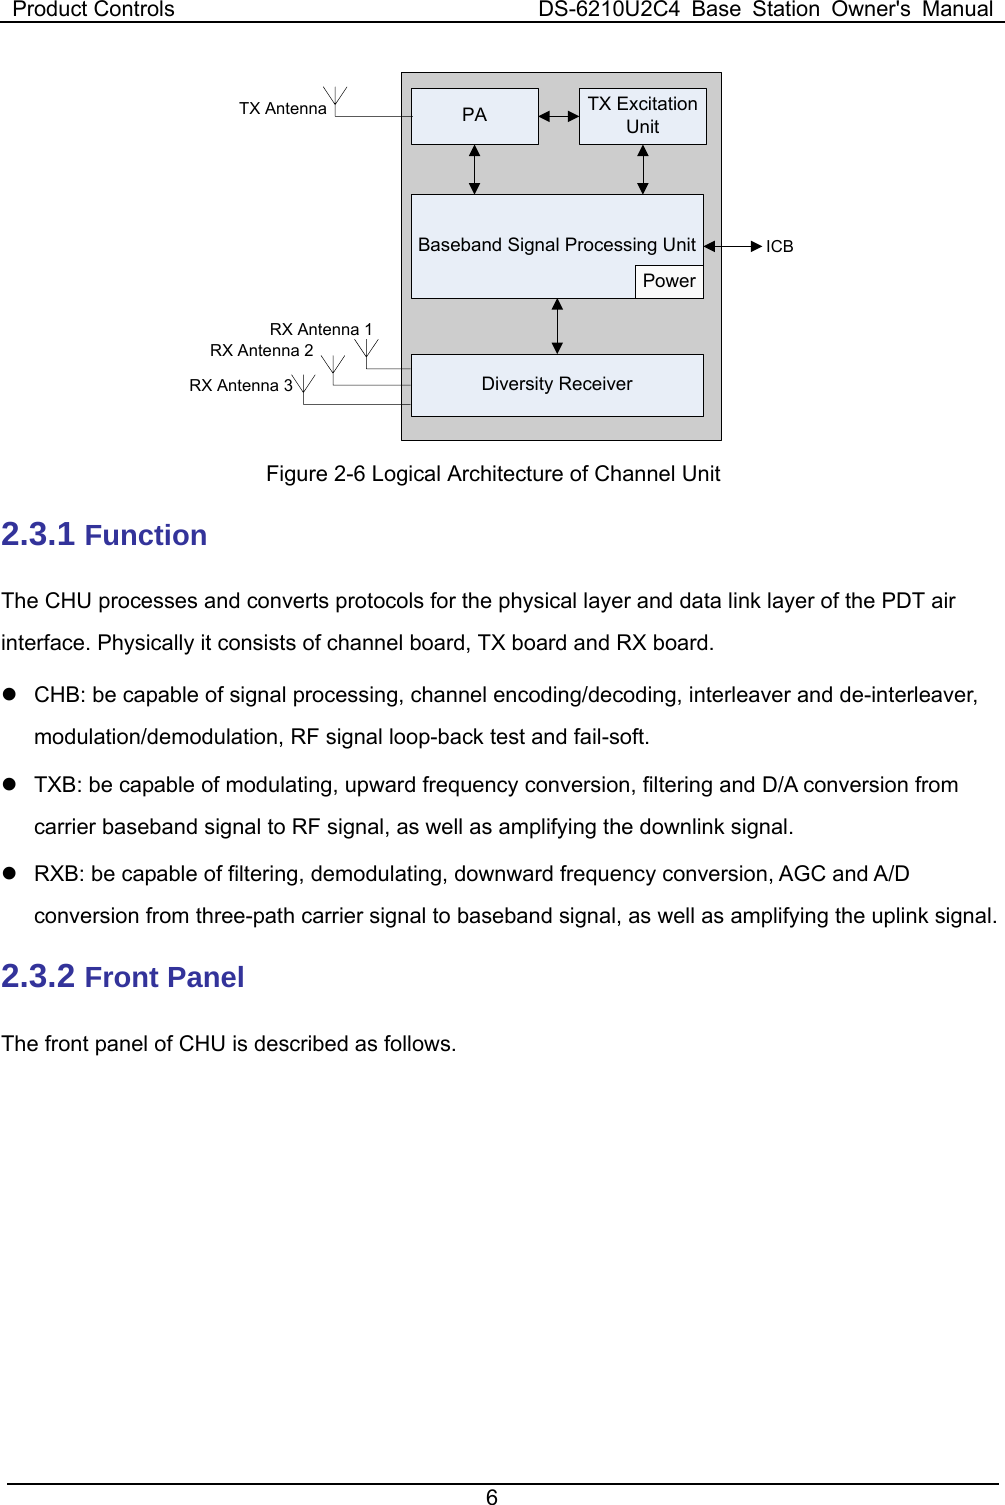 Product Controls  DS-6210U2C4 Base Station Owner&apos;s Manual 6  RX Antenna 3PA TX Excitation UnitBaseband Signal Processing UnitPowerDiversity ReceiverTX AntennaICBRX Antenna 2RX Antenna 1 Figure 2-6 Logical Architecture of Channel Unit 2.3.1 Function The CHU processes and converts protocols for the physical layer and data link layer of the PDT air interface. Physically it consists of channel board, TX board and RX board.   z  CHB: be capable of signal processing, channel encoding/decoding, interleaver and de-interleaver, modulation/demodulation, RF signal loop-back test and fail-soft.   z  TXB: be capable of modulating, upward frequency conversion, filtering and D/A conversion from carrier baseband signal to RF signal, as well as amplifying the downlink signal.   z  RXB: be capable of filtering, demodulating, downward frequency conversion, AGC and A/D conversion from three-path carrier signal to baseband signal, as well as amplifying the uplink signal.   2.3.2 Front Panel   The front panel of CHU is described as follows.   